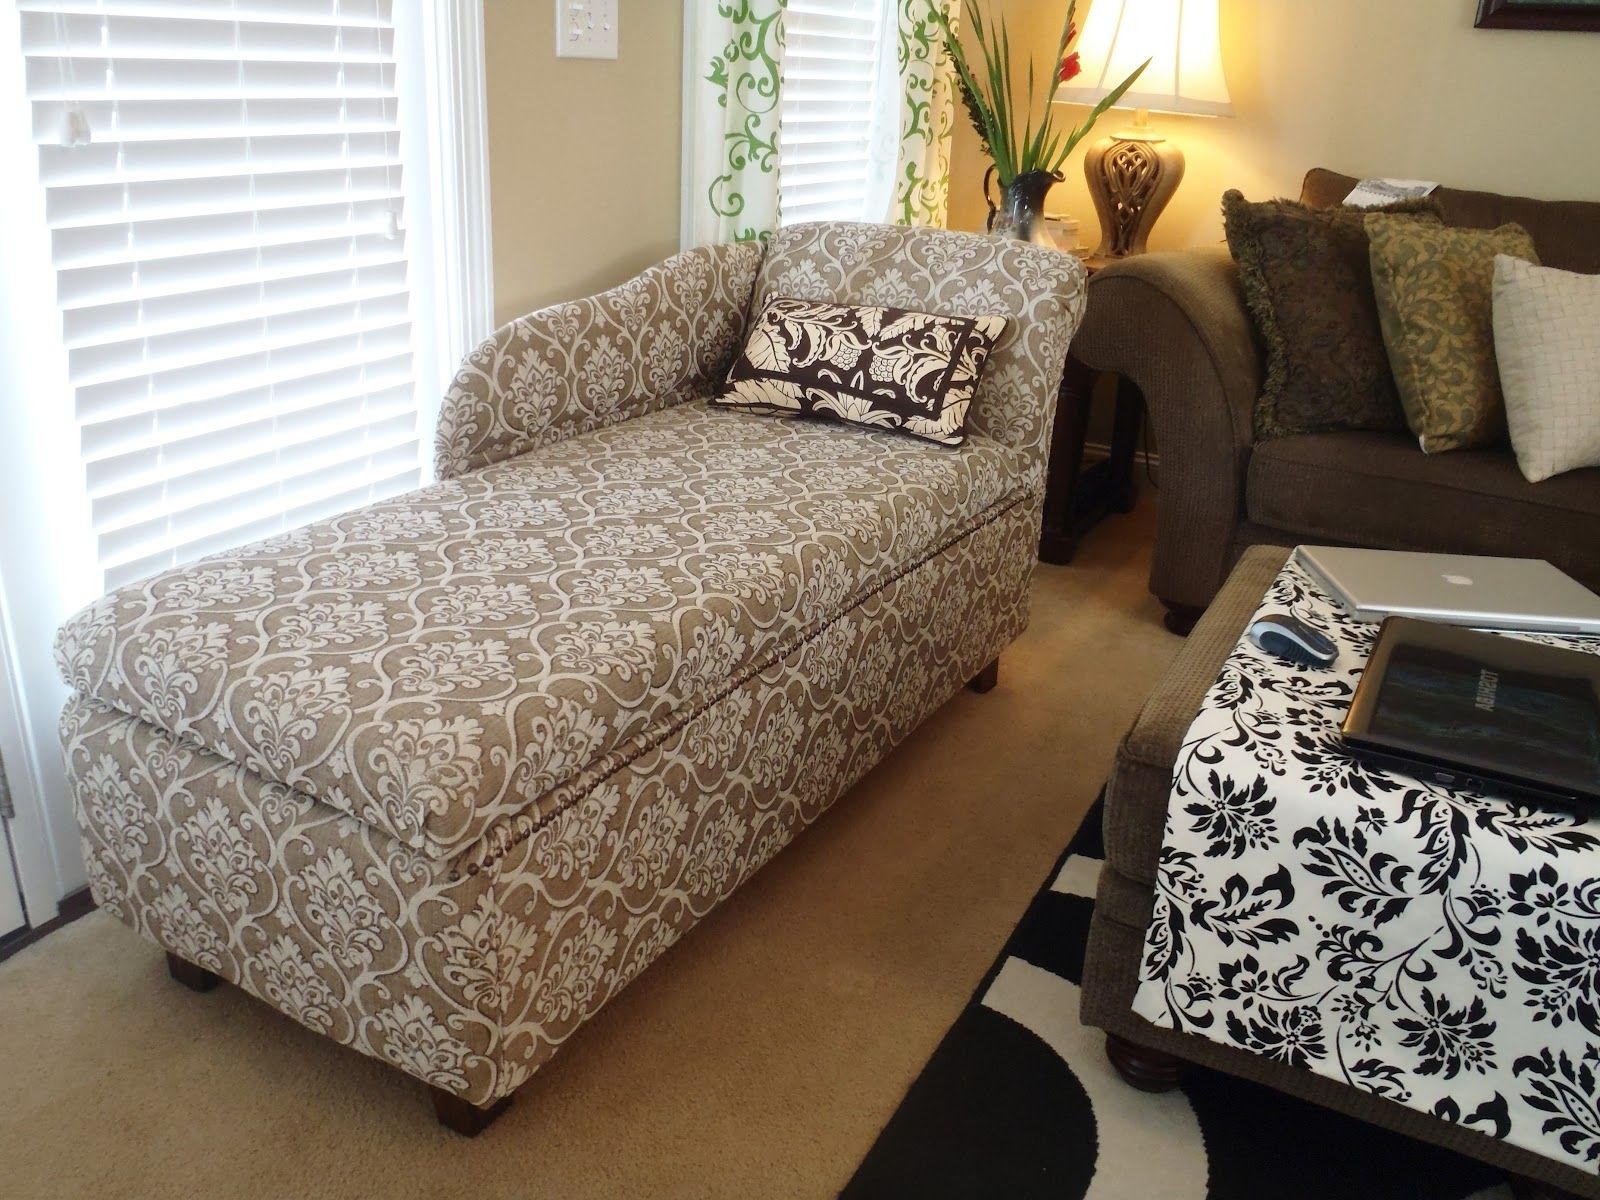 2018 Storage Chaise Lounges Throughout Lazy Liz On Less: Storage Chaise Lounge (View 10 of 15)